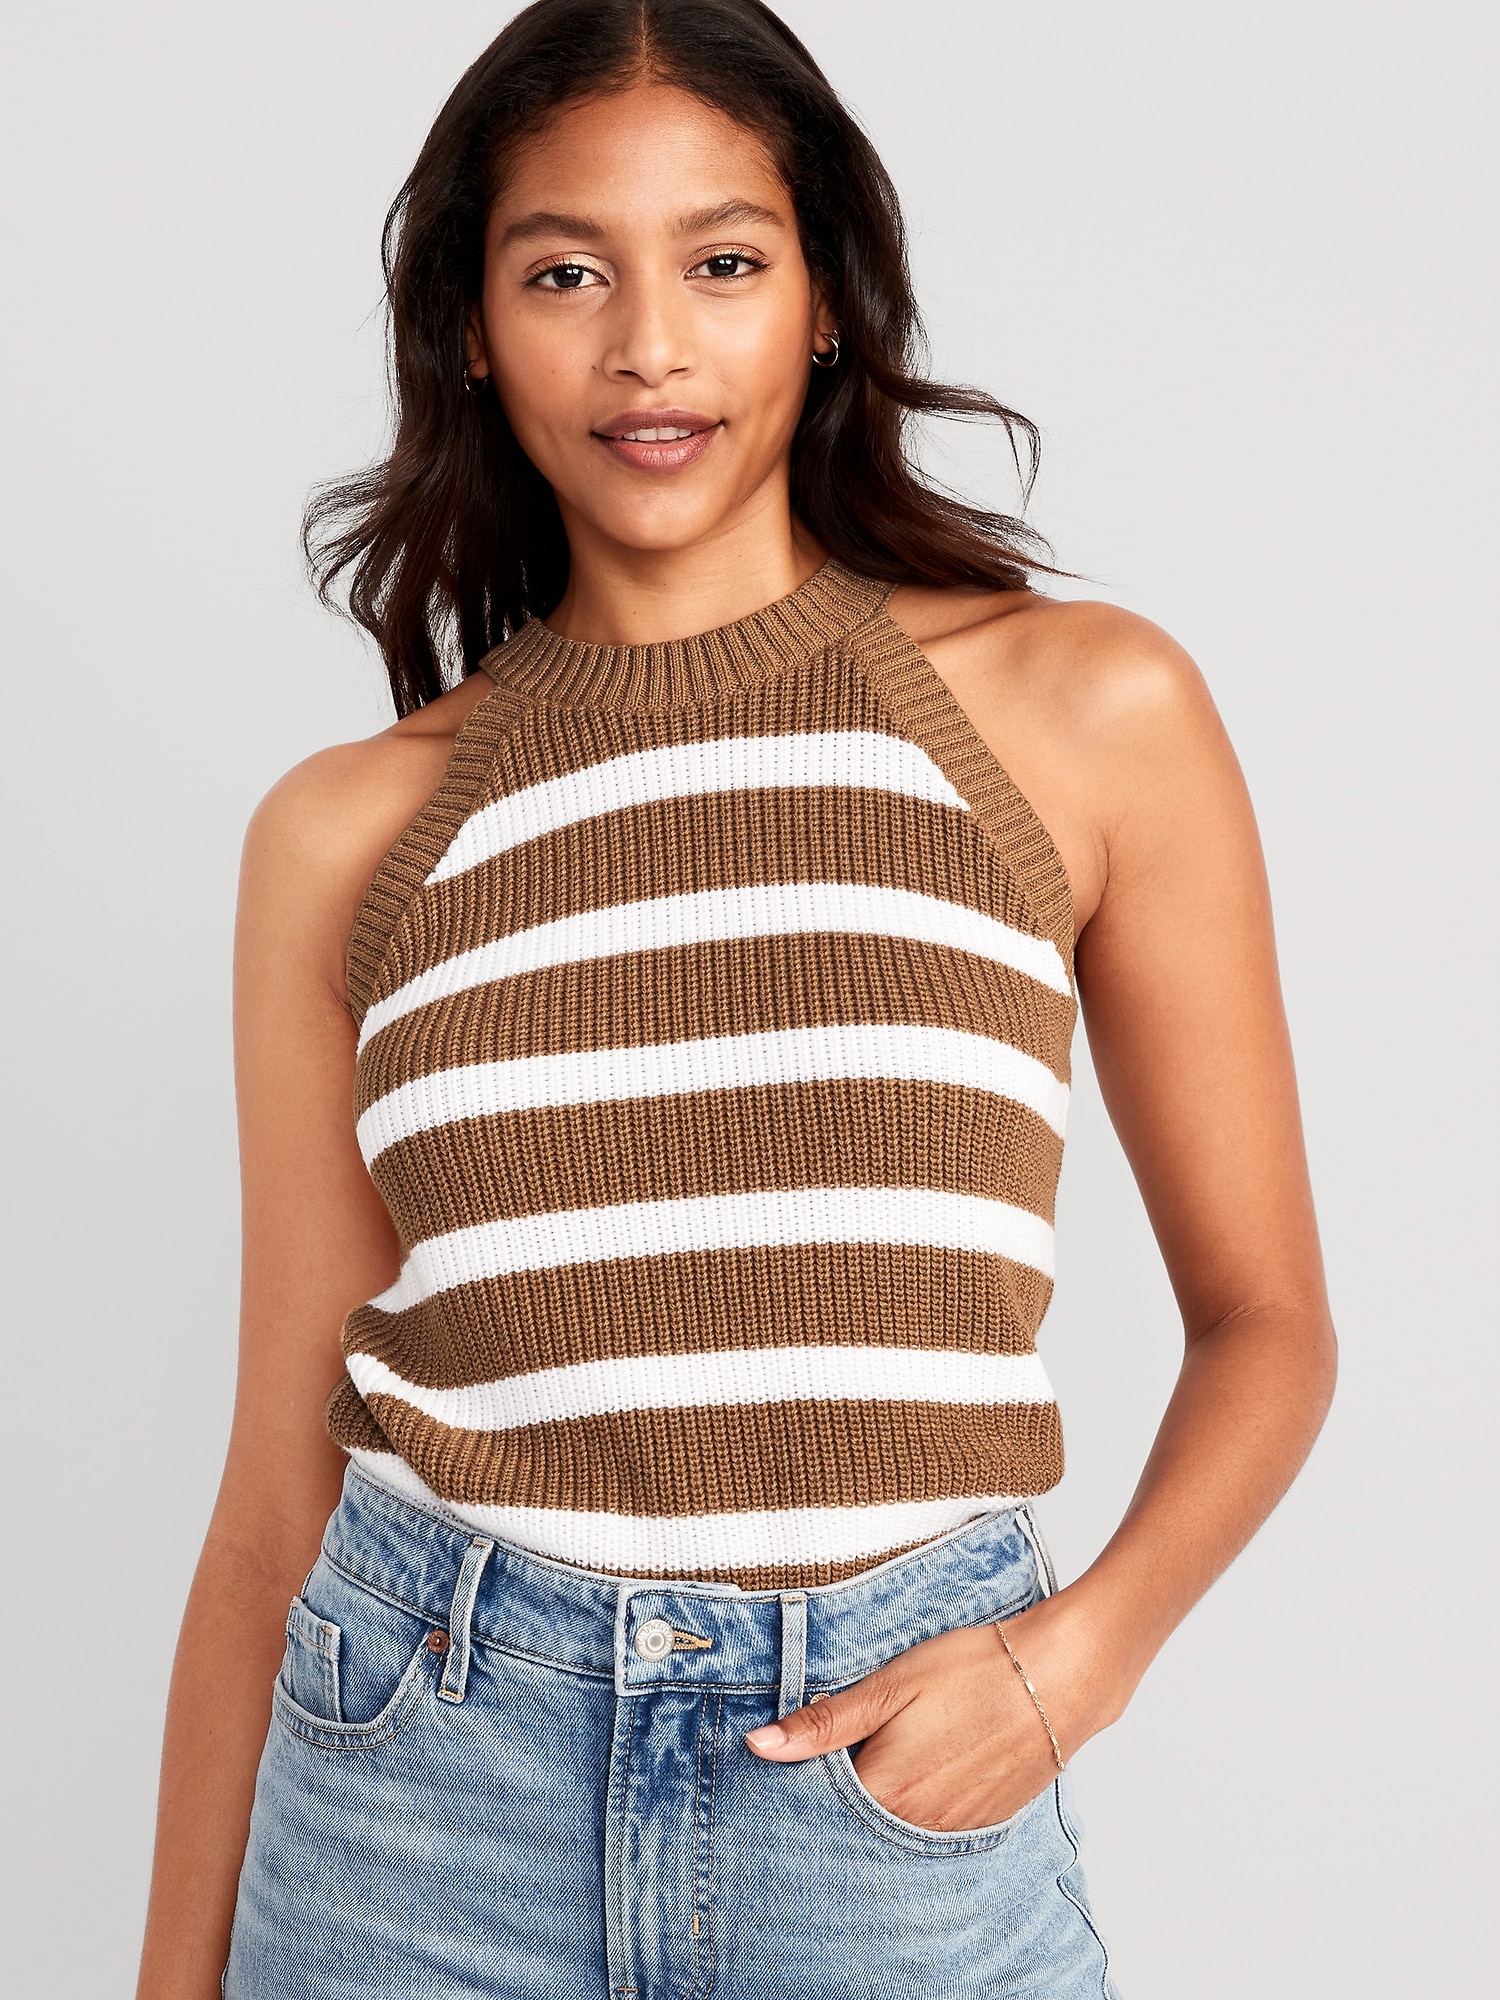 Cozy Cropped Sweater Tank Top for Women